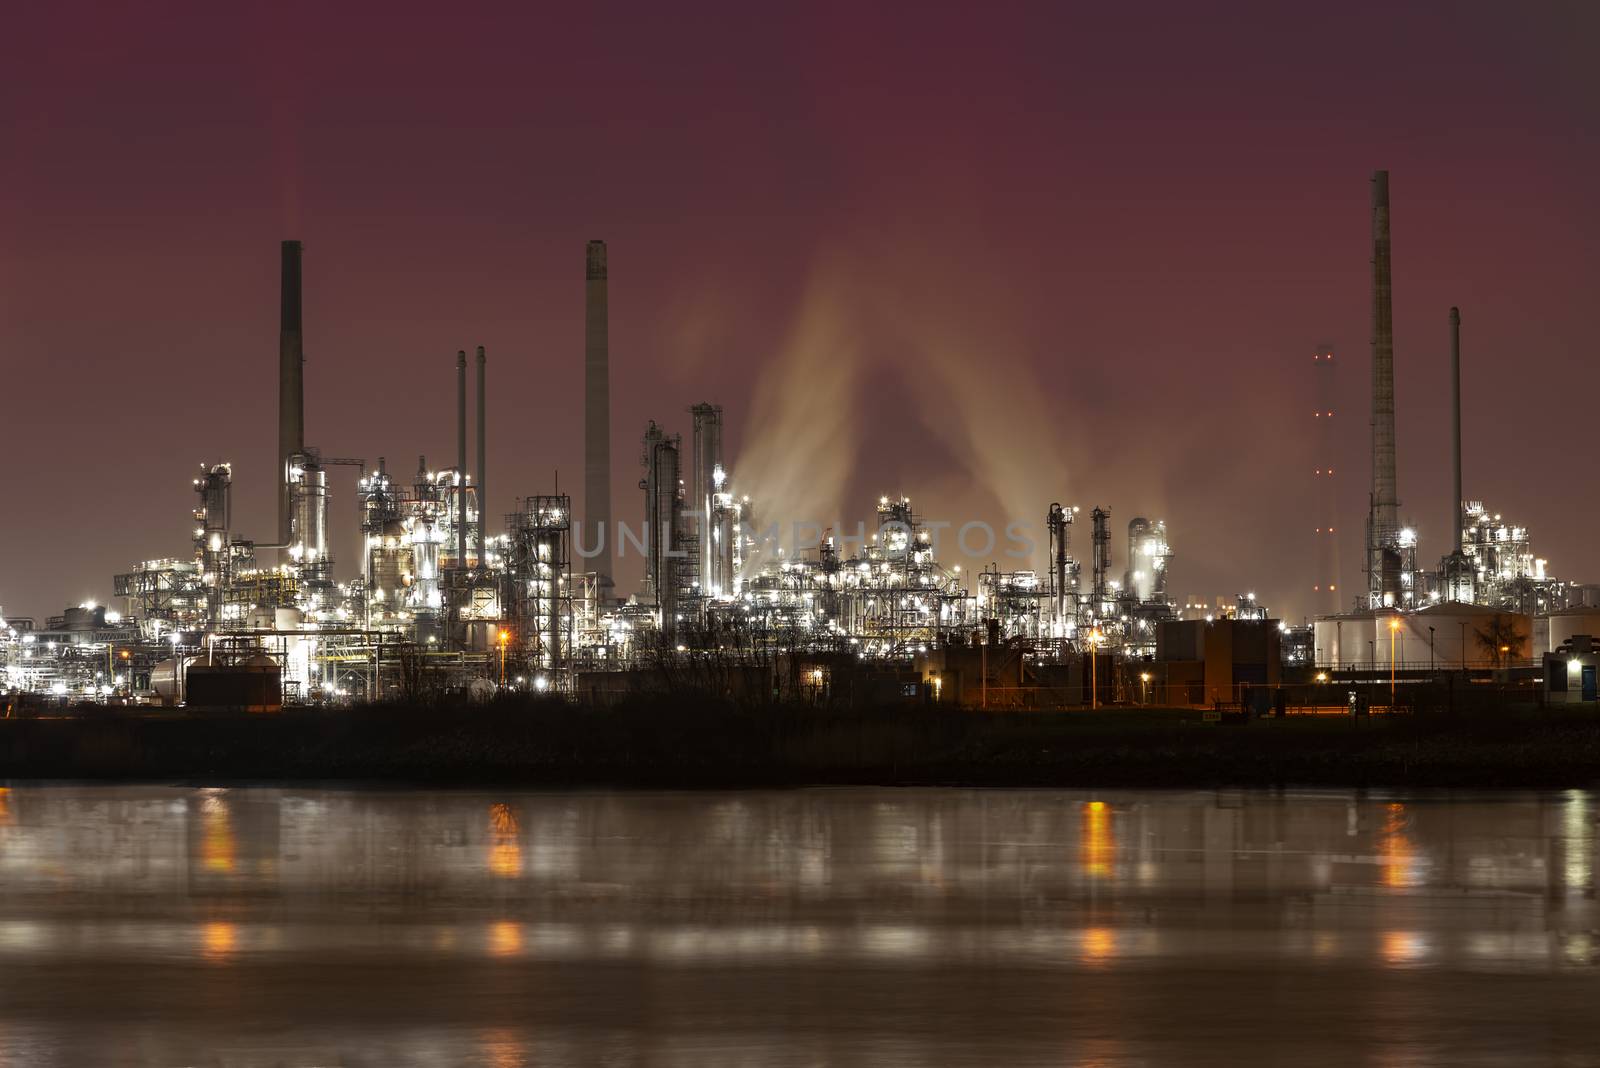 Reflection of refineries and its chimney during the on fire sunset golden hour moment at Rotterdam, Netherlands by ankorlight